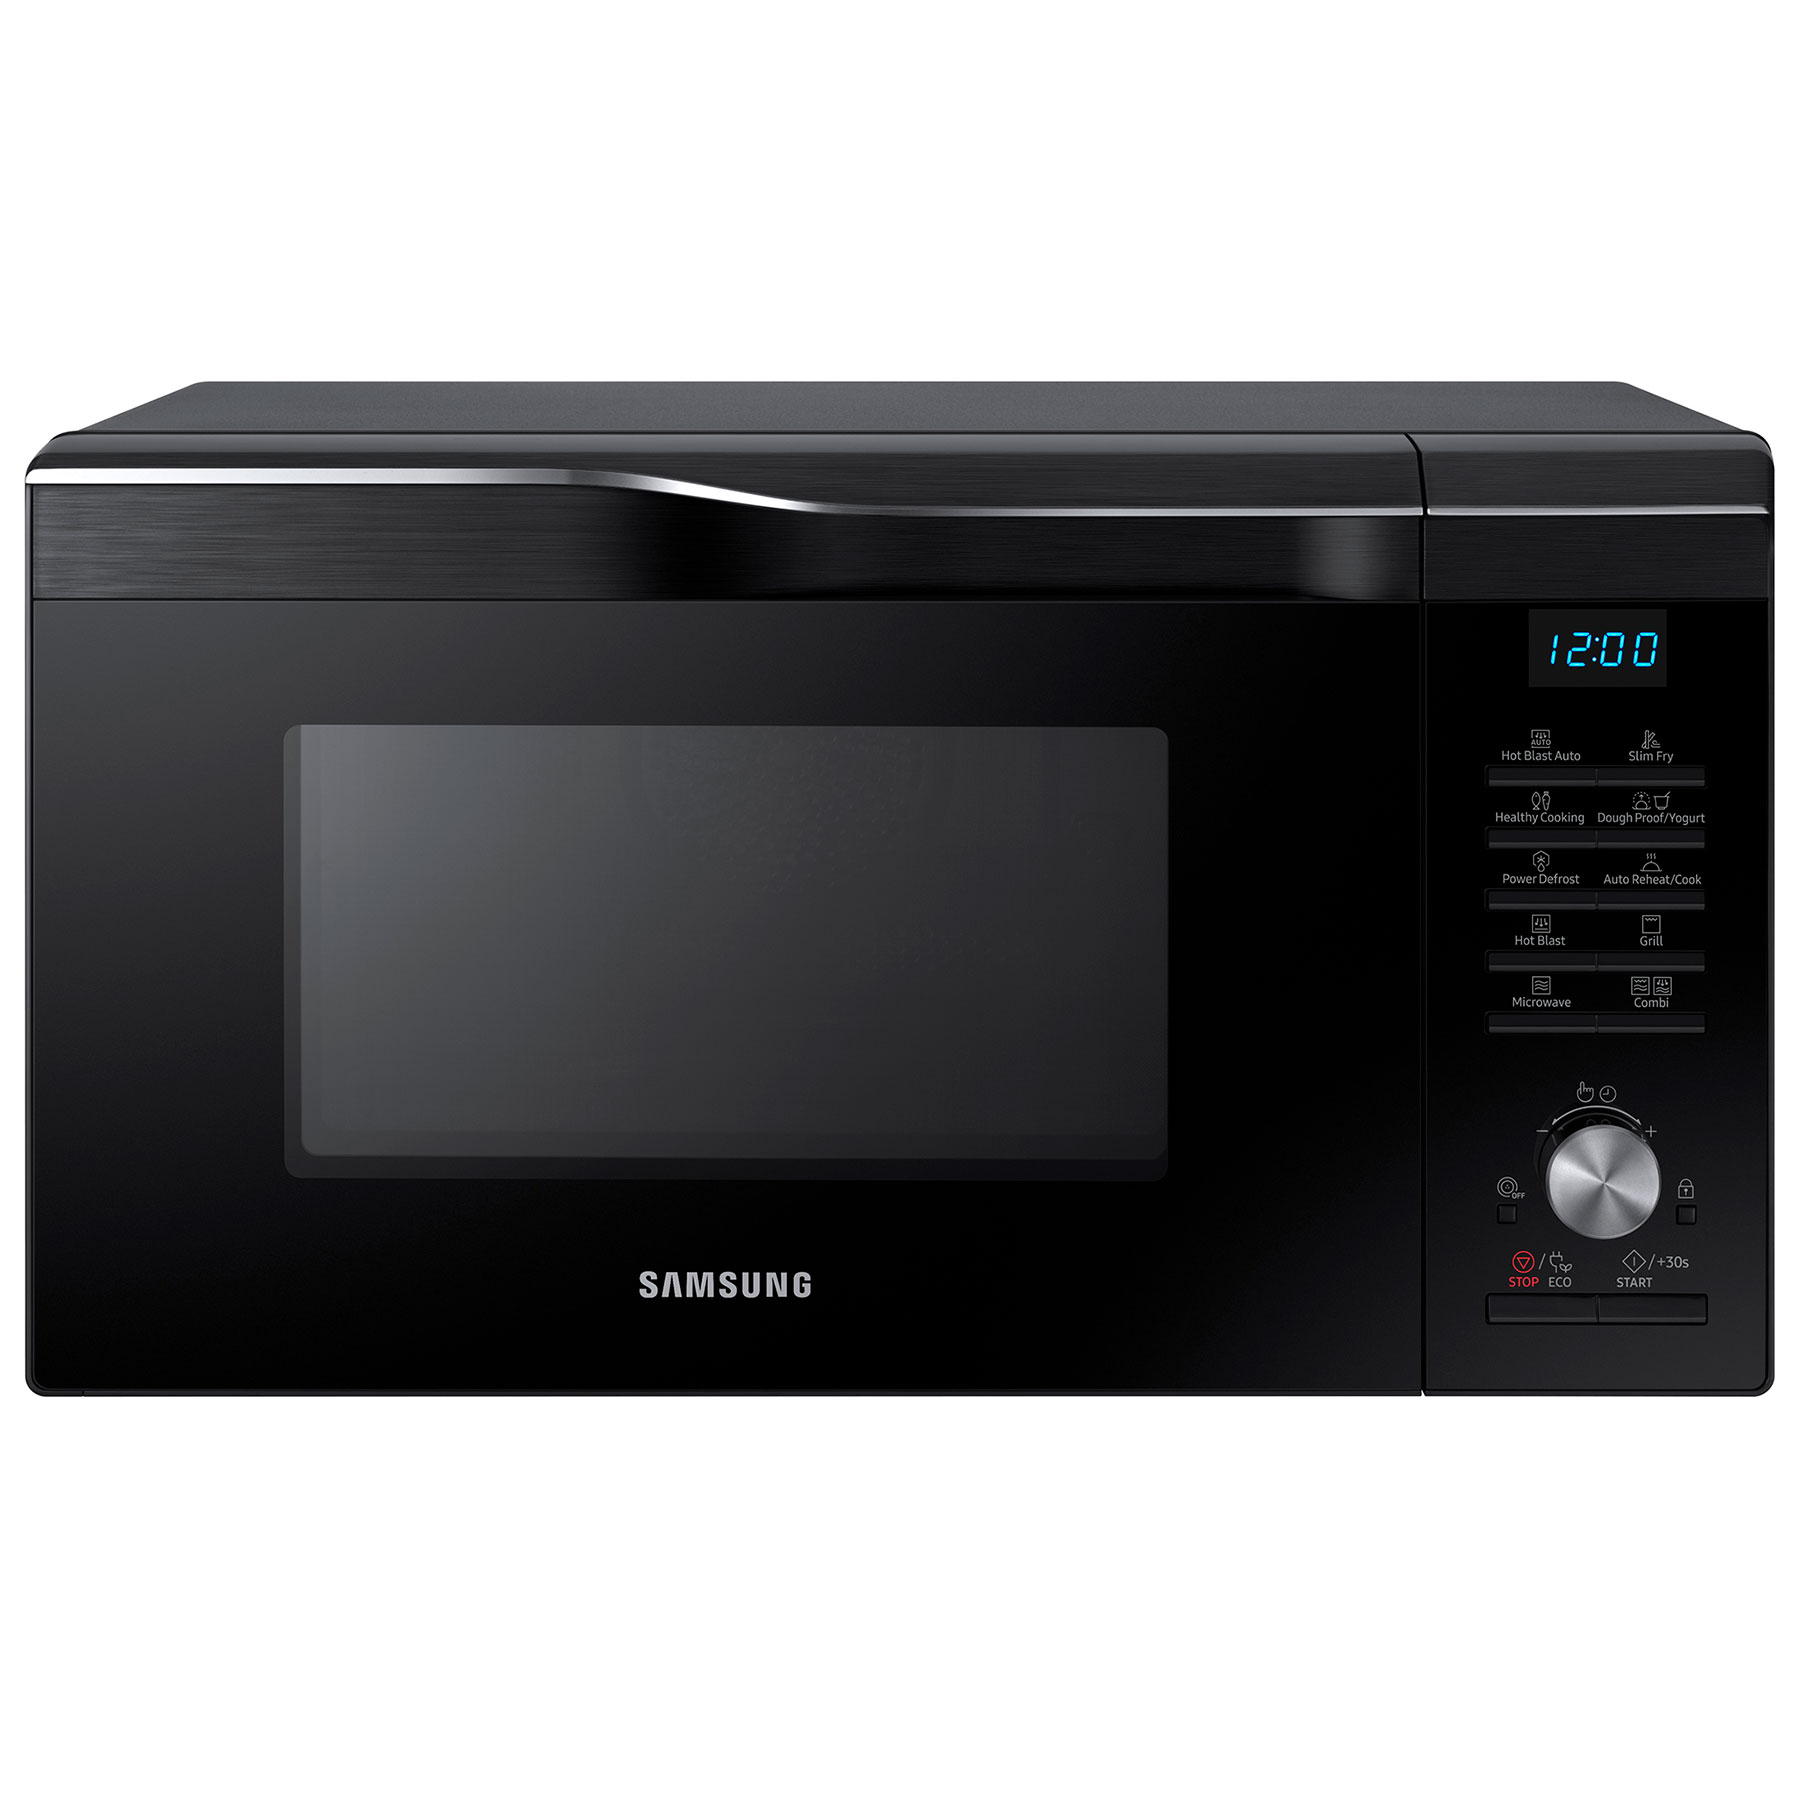 Image of Samsung MC28M6055CK Combination Microwave Oven in Black 28 Litre 900W